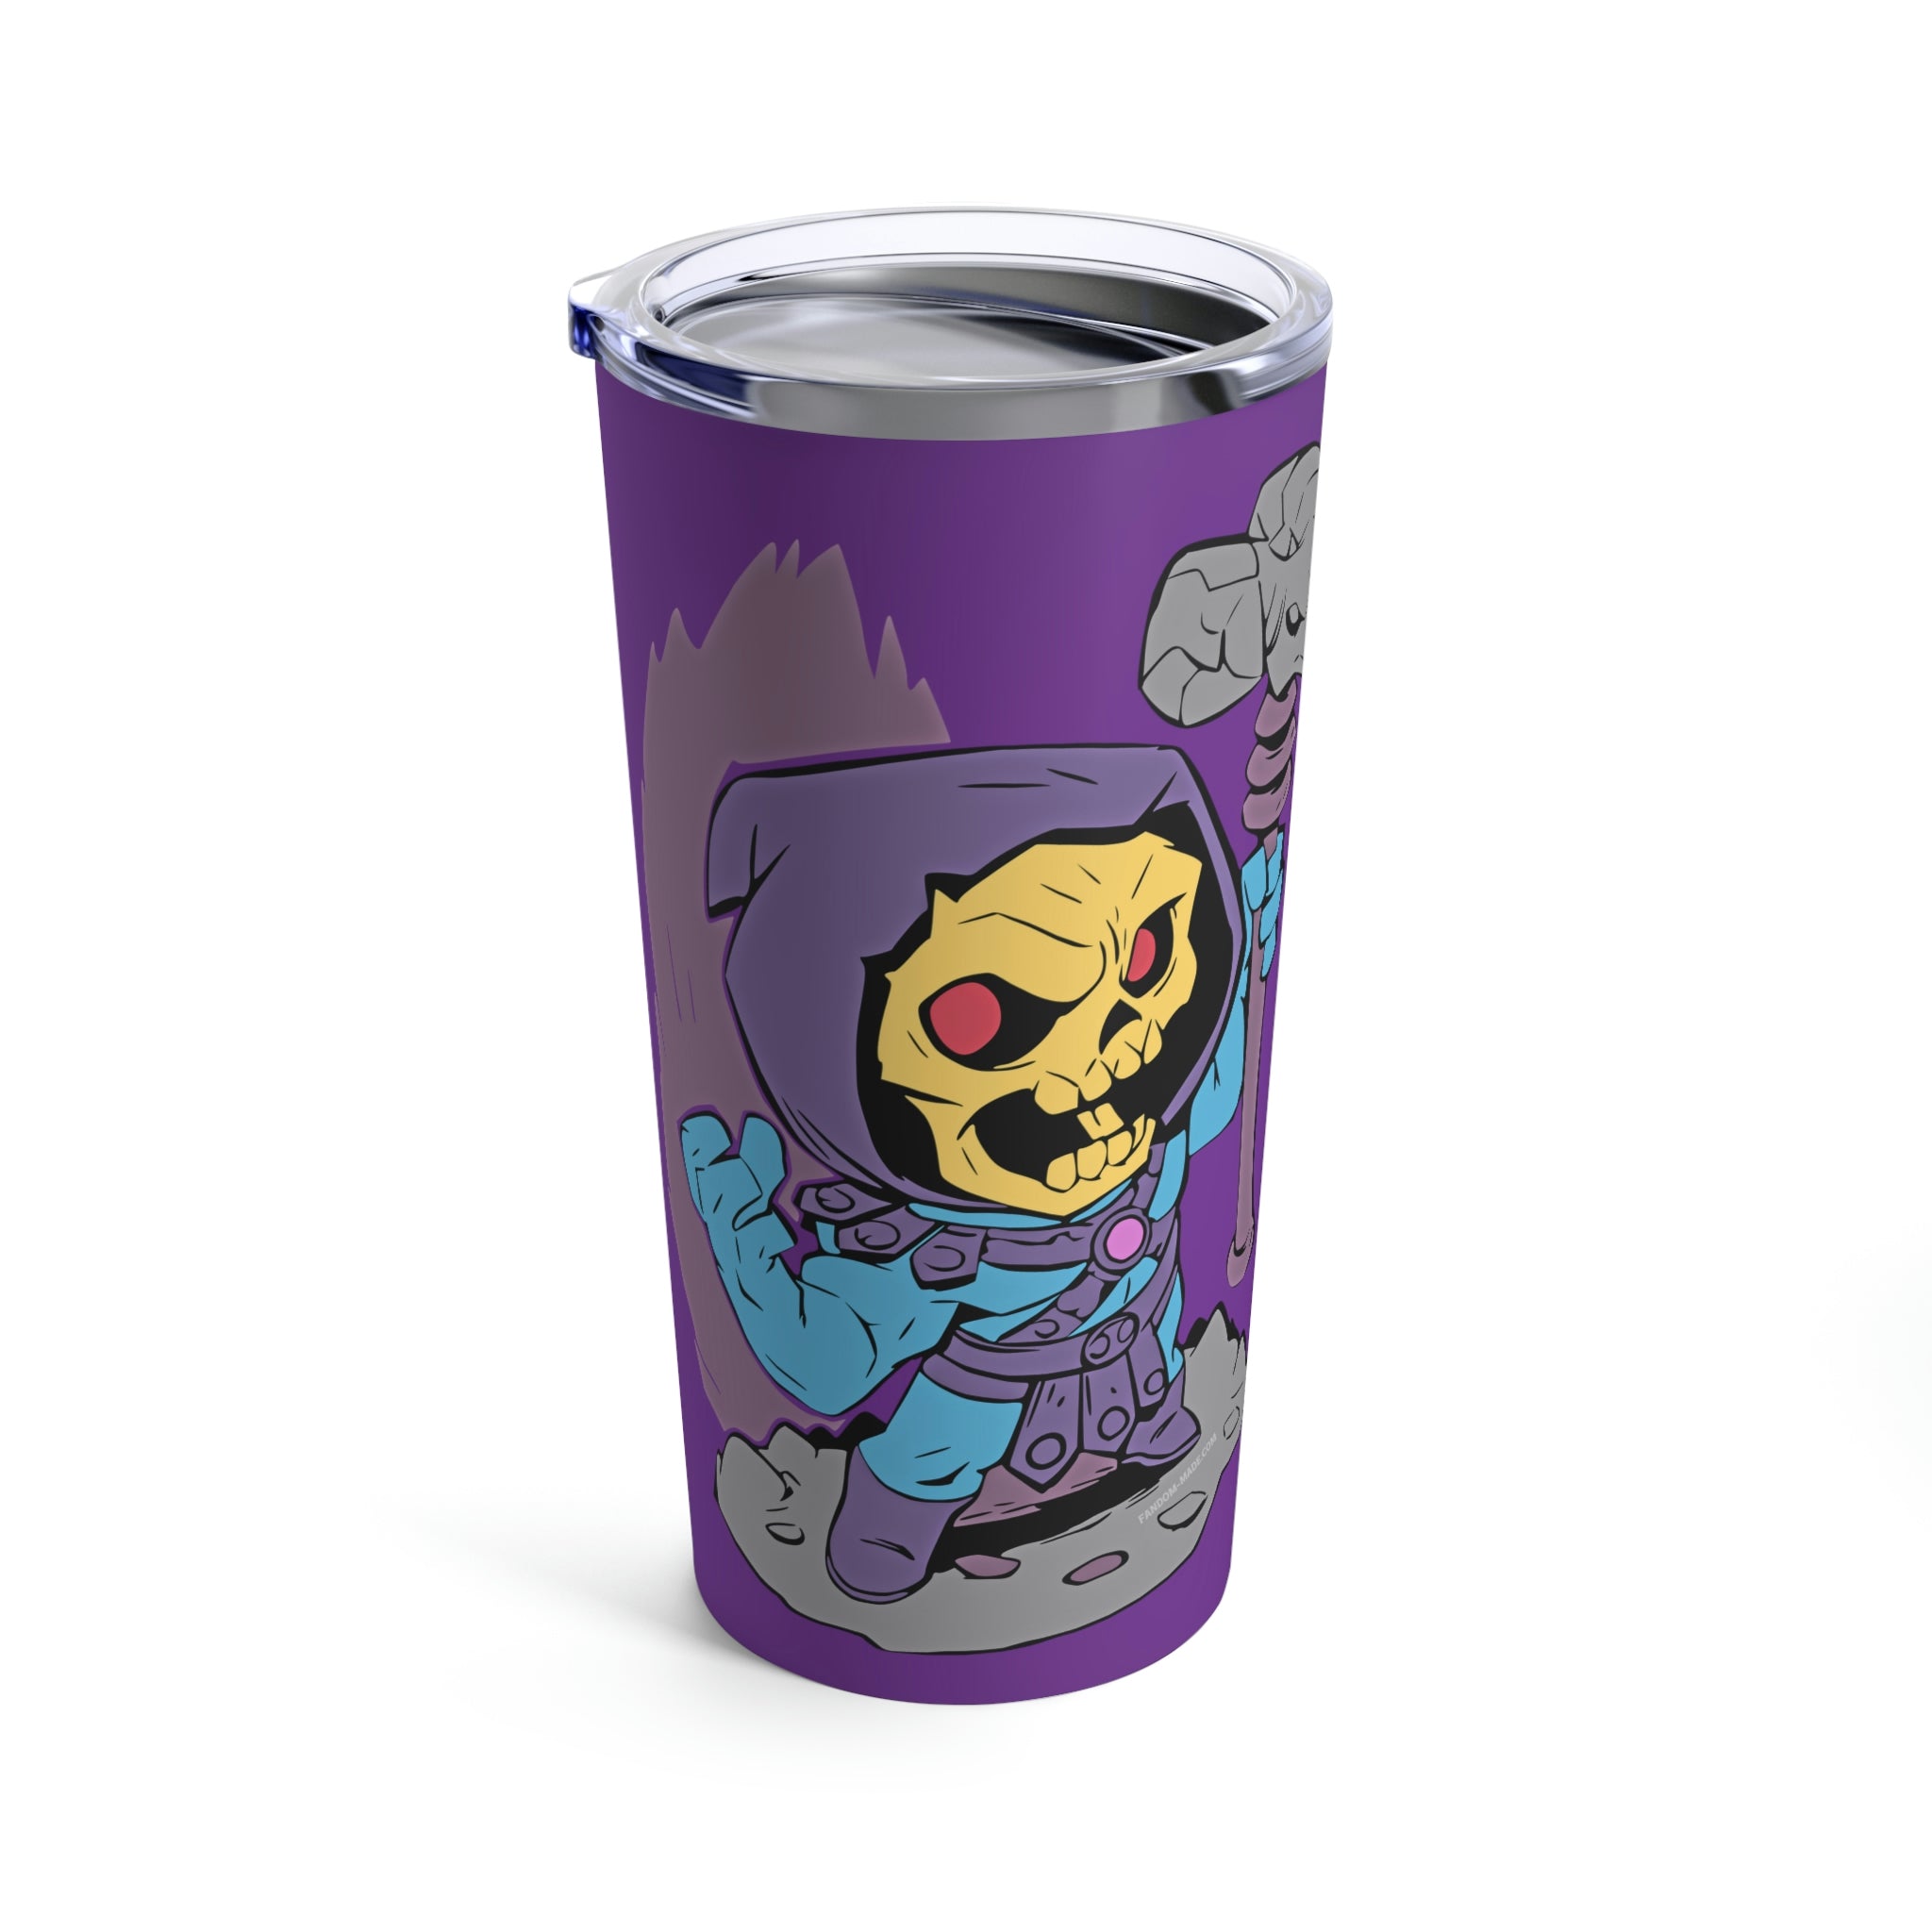 Order your new Beast Tumbler today and Get 15% Off as part of our   Flash Deal